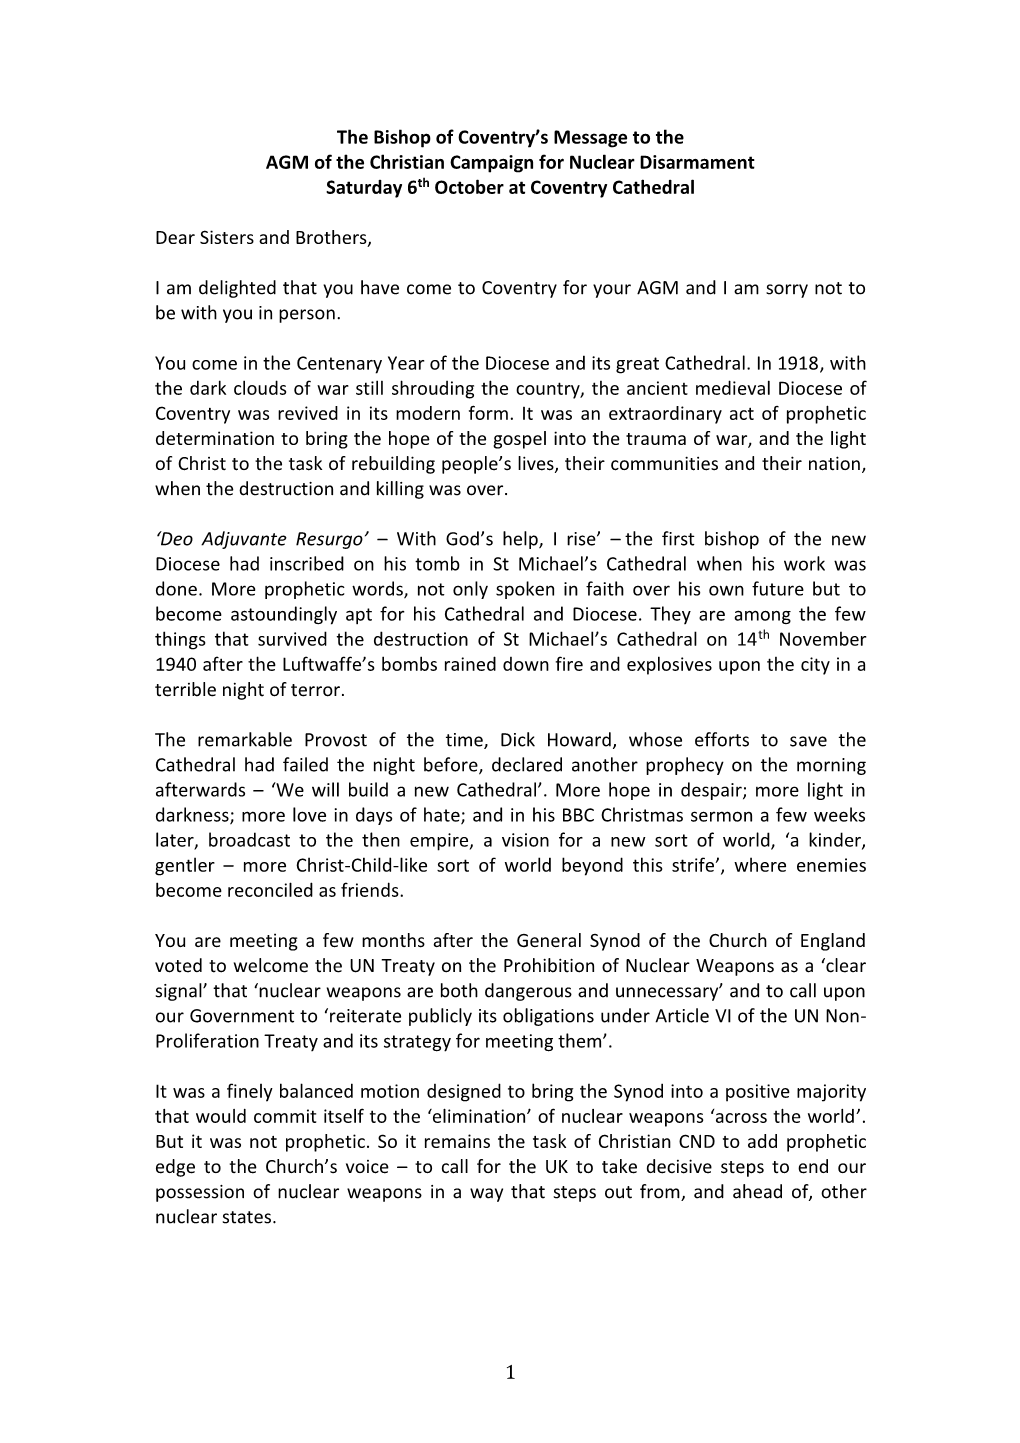 The Bishop of Coventry's Message to the AGM of the Christian Campaign